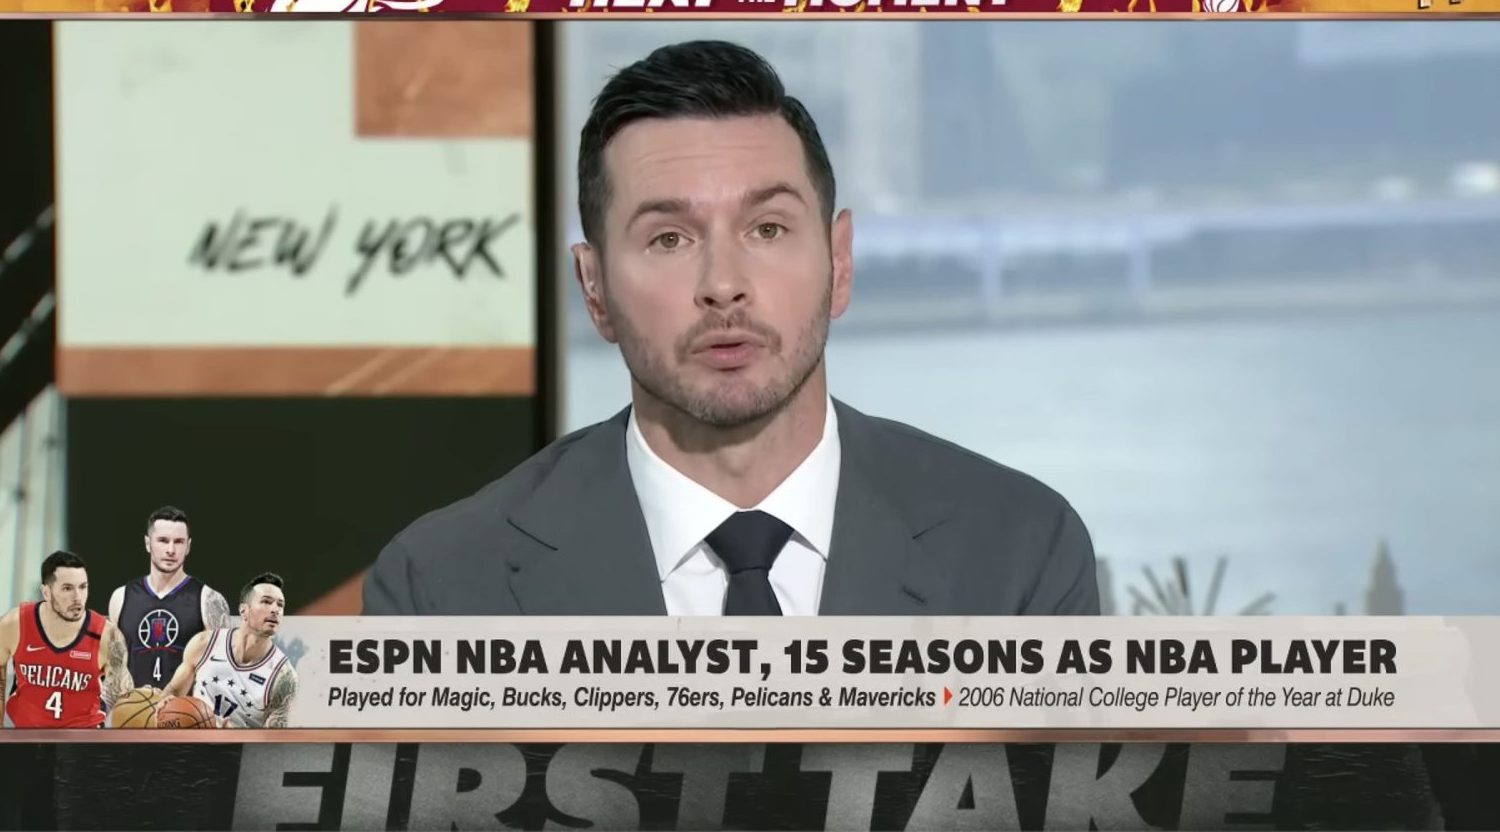 Hornets reportedly interviewing ESPN’s JJ Redick for head coaching job